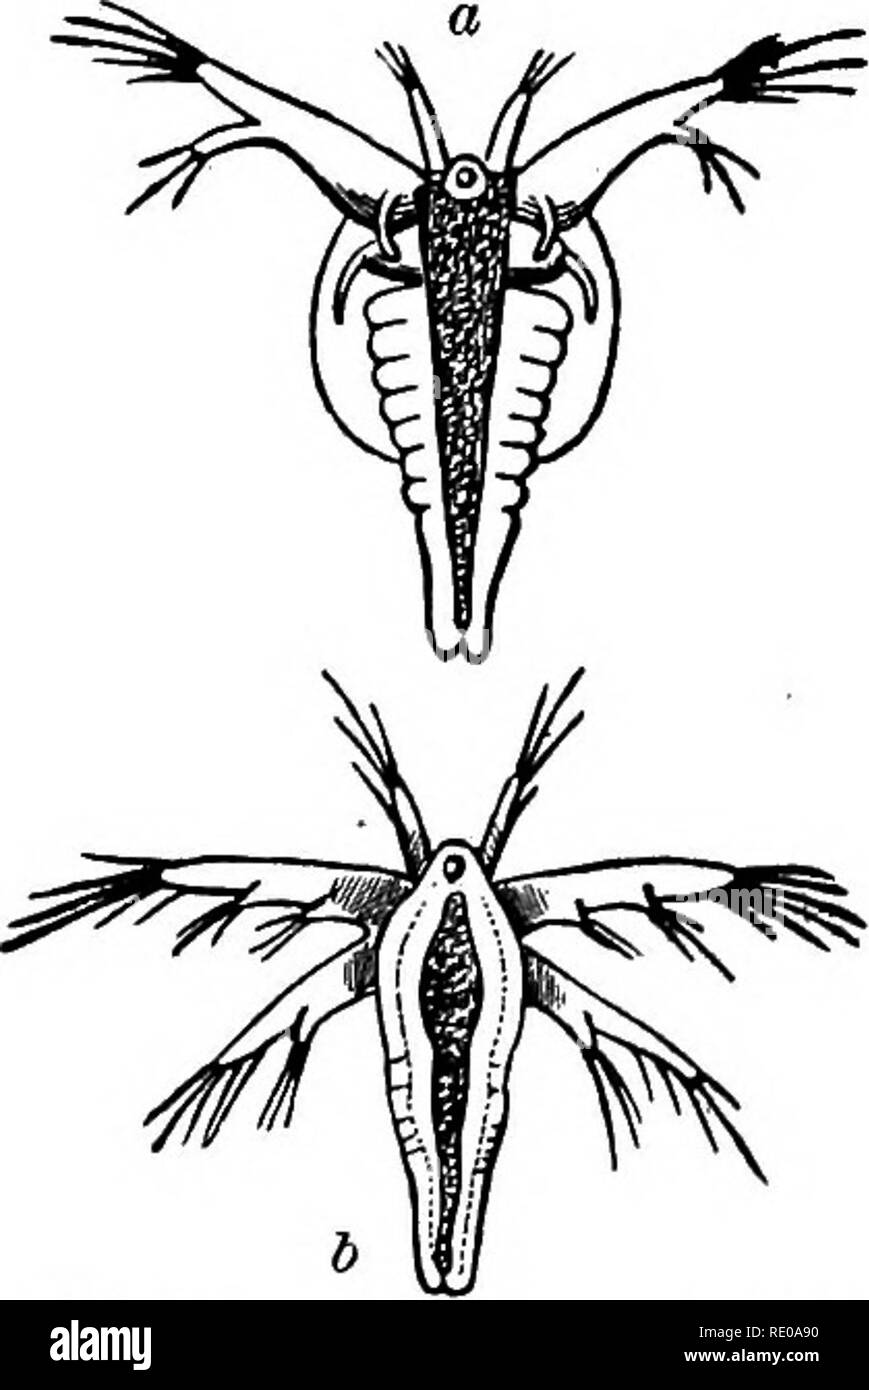 . Zoology for high schools and colleges. Zoology. Fig. 2iZ.—Lepidurus CoueHi, side and dorsal view, natural Fig, 242.—Apas WQualis, natural size. large and in the male adapted for clasping. In Thamnocephalus (Fig. 245, T. hrachyurus Packard, from Kansas) there is a singular shrub- like projection of the front of the head, and the abdomen is spatulate or spoon-shaped at the end. Bran- chinectes Coloradensis Pack. (Fig. 246) is a Kocky Mountain form. f}s- ^i.-a, r.arv. ,t Apia can- „, , . , .•' . , . 1. enformU. — After Zaddach. *, Ihe brine - shrimp, Artemia, Ivres NmpWaaot ArtemiasaUnaofEu- Ol Stock Photo